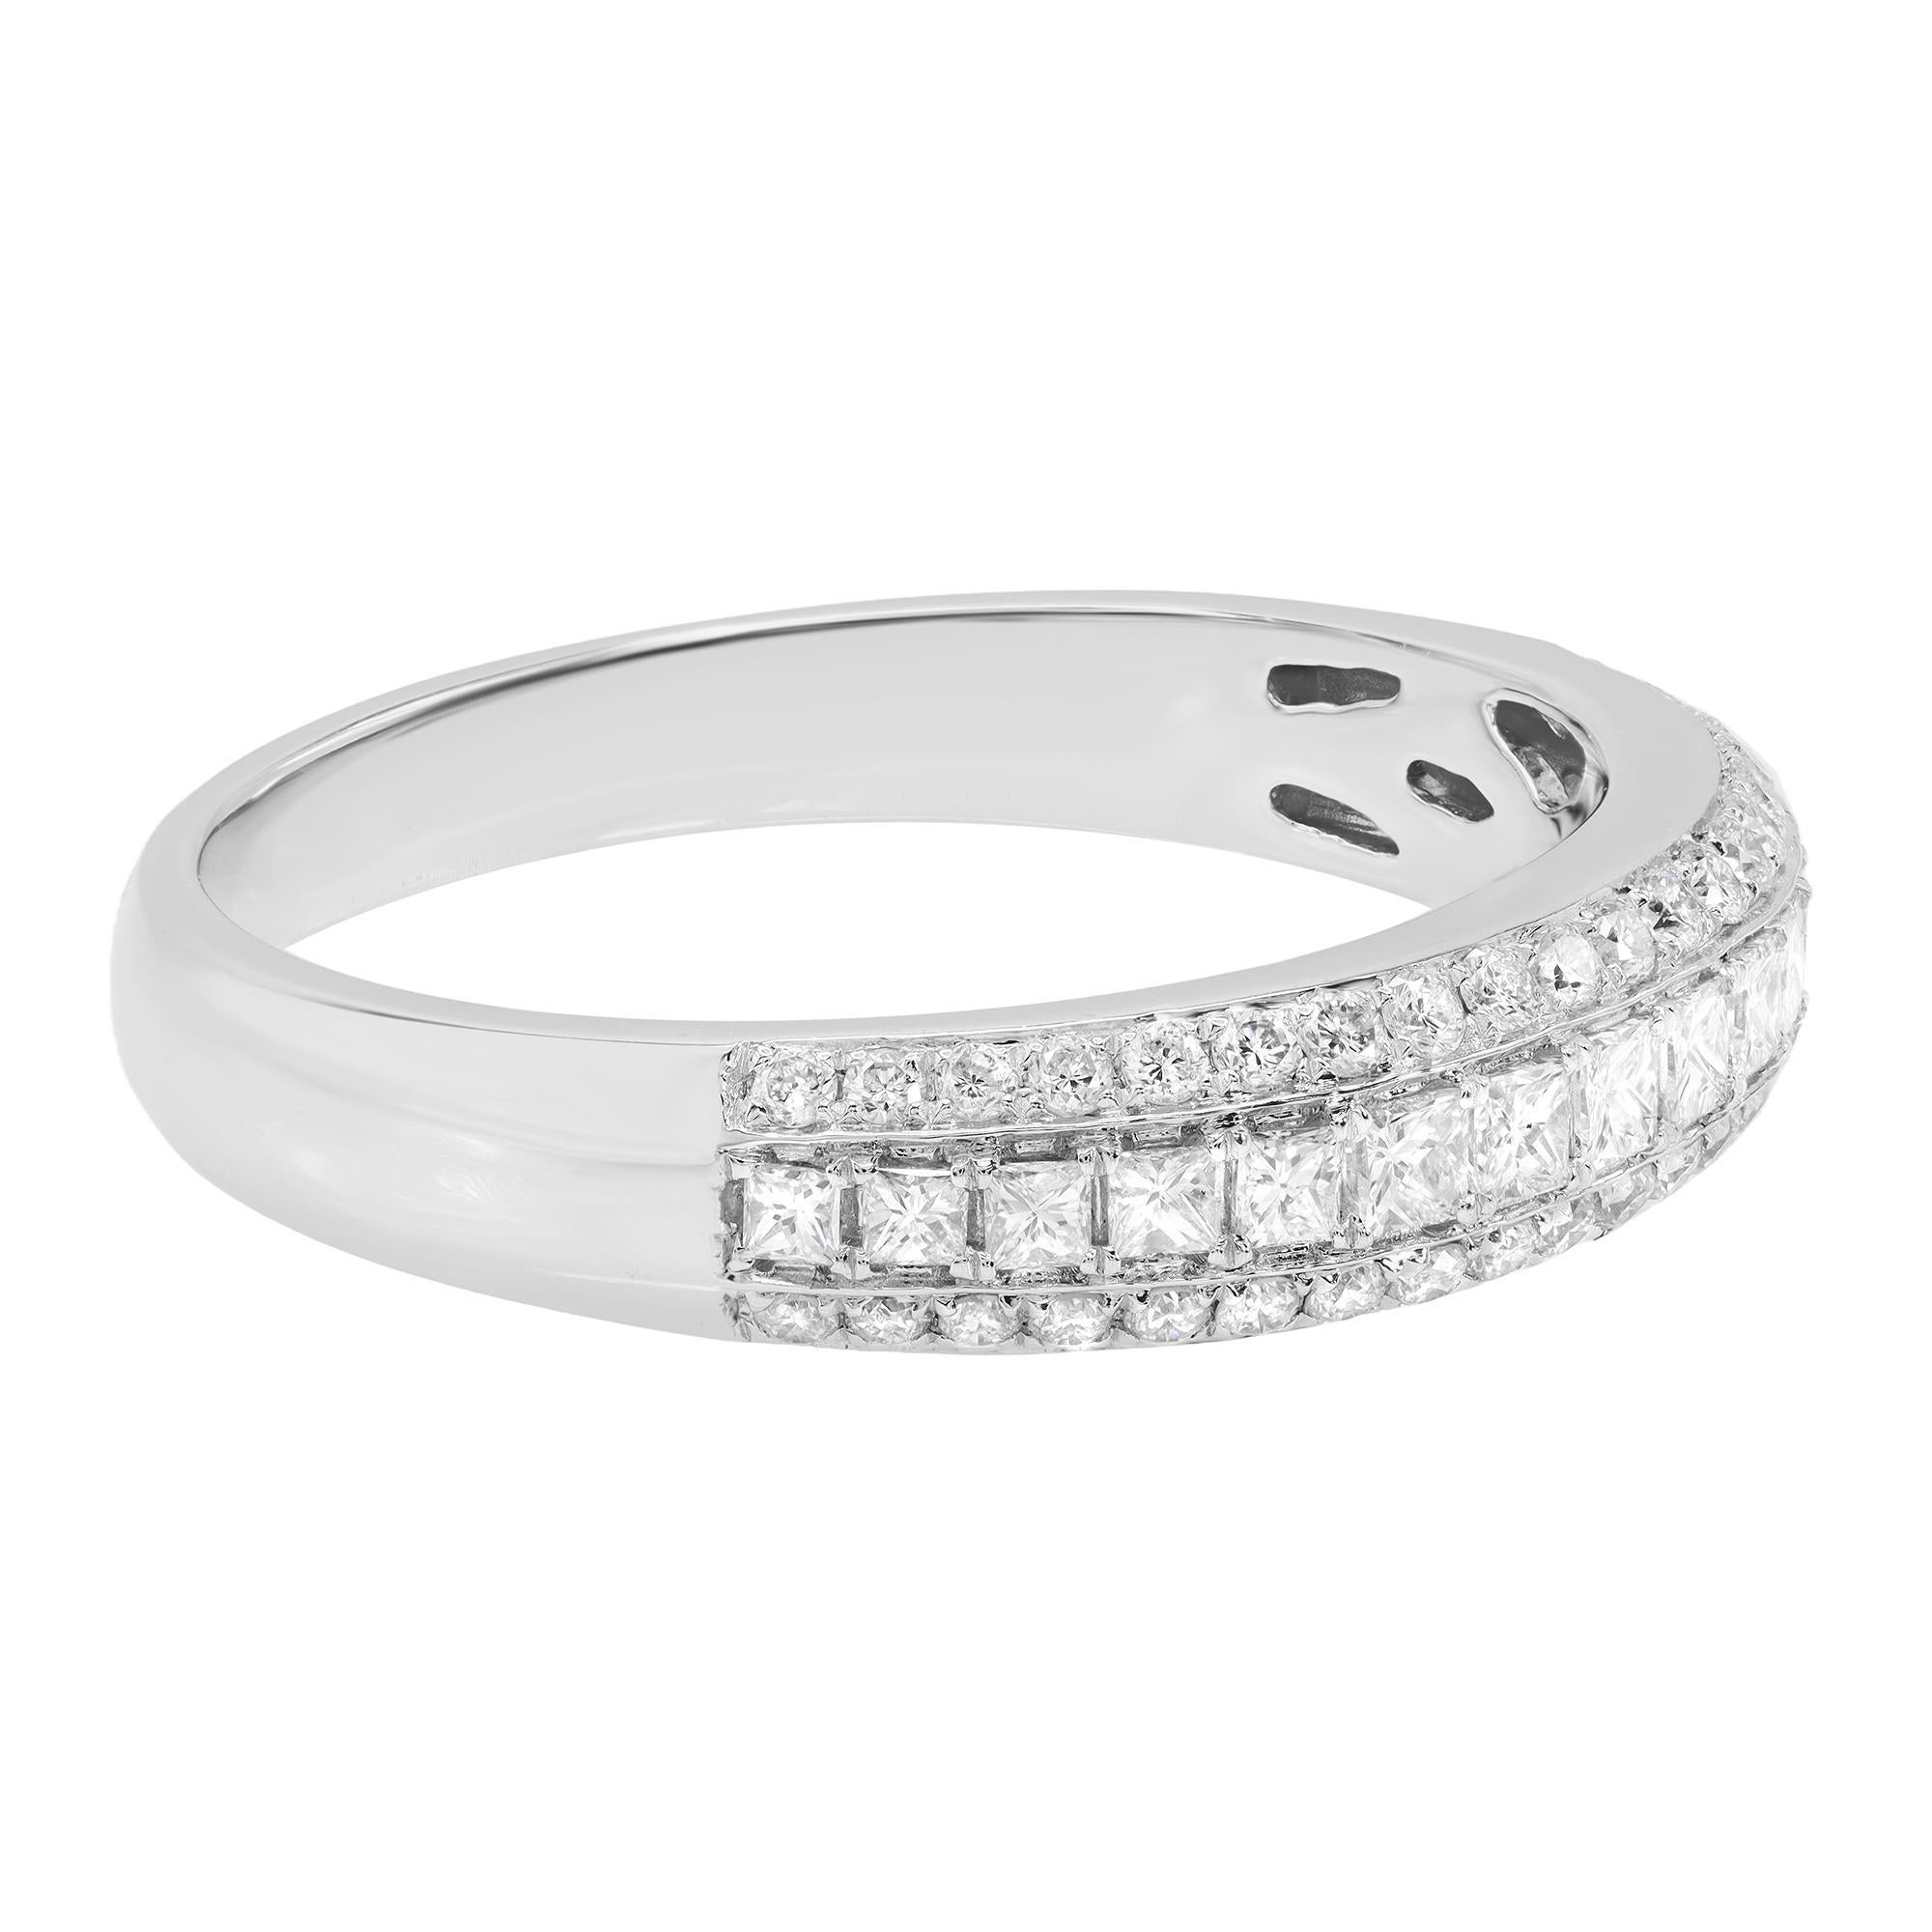 This wedding band combines the beauty of multi shaped diamonds with superior quality 18k white gold. Sixteen princess-cut diamonds and forty round cut diamonds weighing approximately .0.67cttw. Diamond color I and SI-I clarity. Ring size 7. Comes